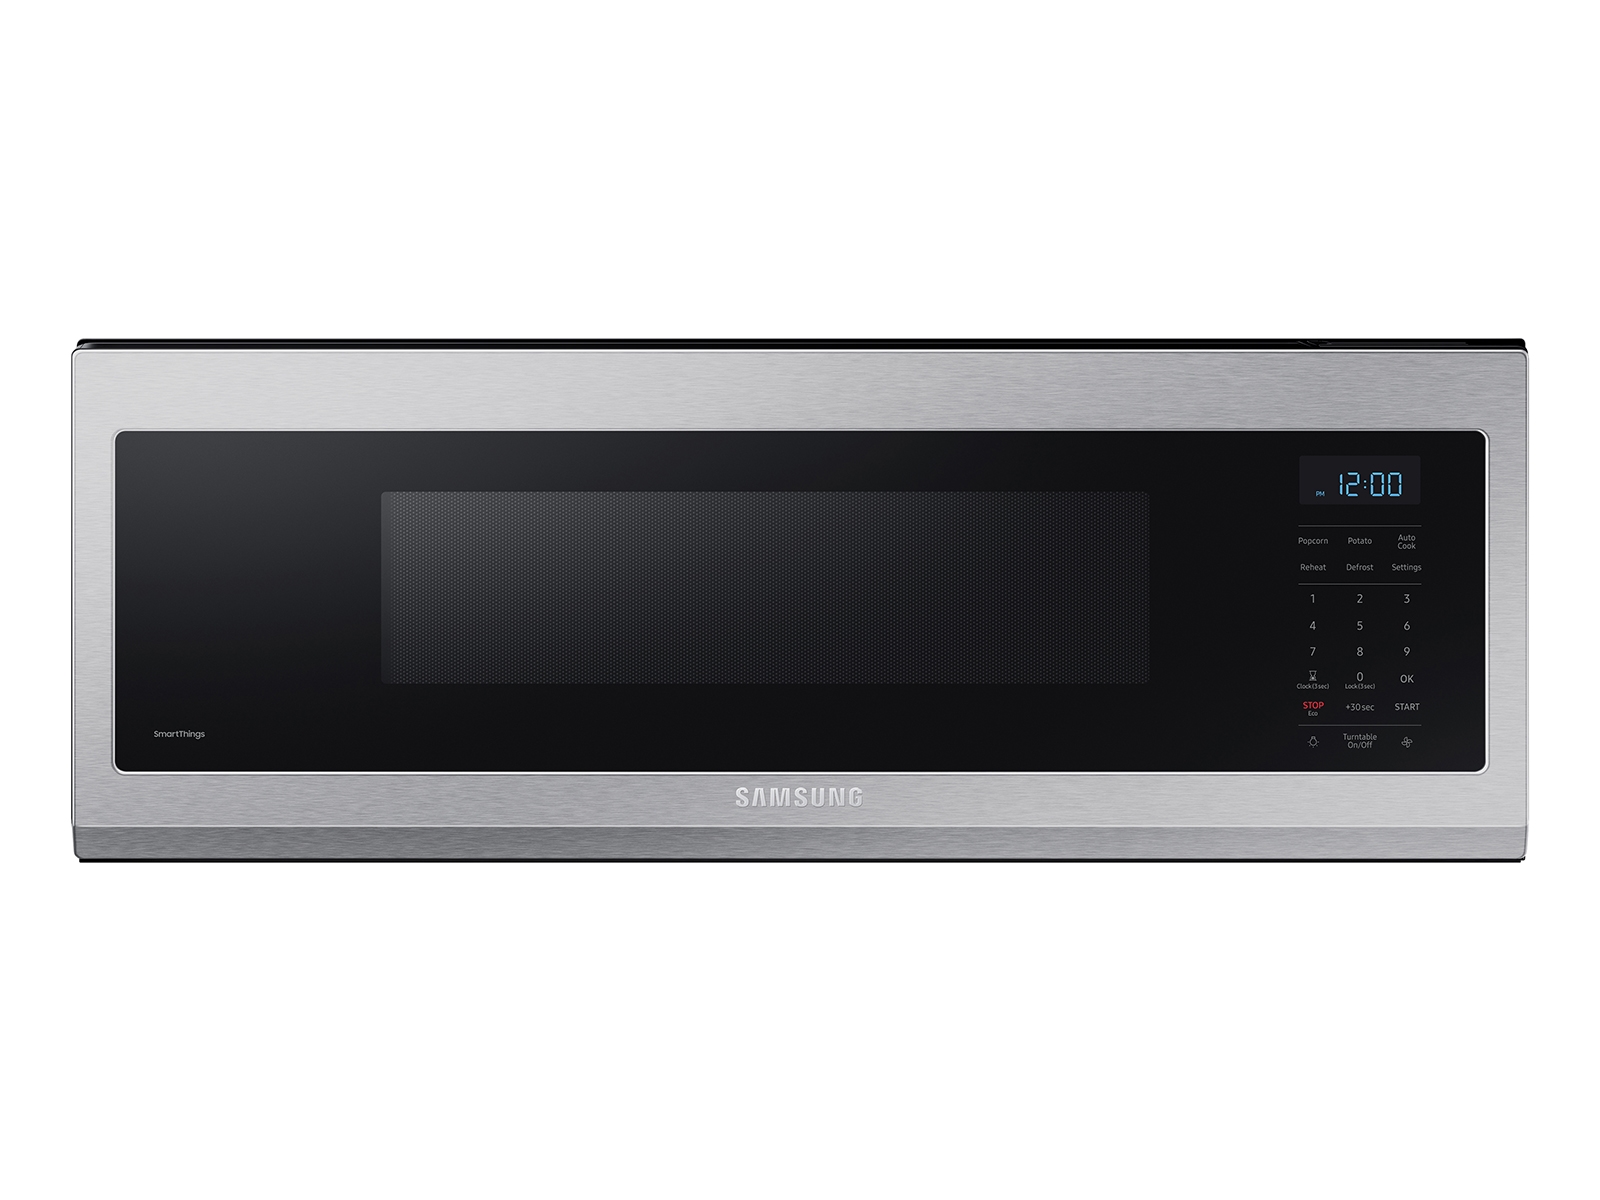 https://image-us.samsung.com/SamsungUS/home/home-appliances/microwaves/pdp/me11a7510ds-aa/gallery/ME11A7510DS_01_Silver_SCOM.jpg?$product-details-jpg$